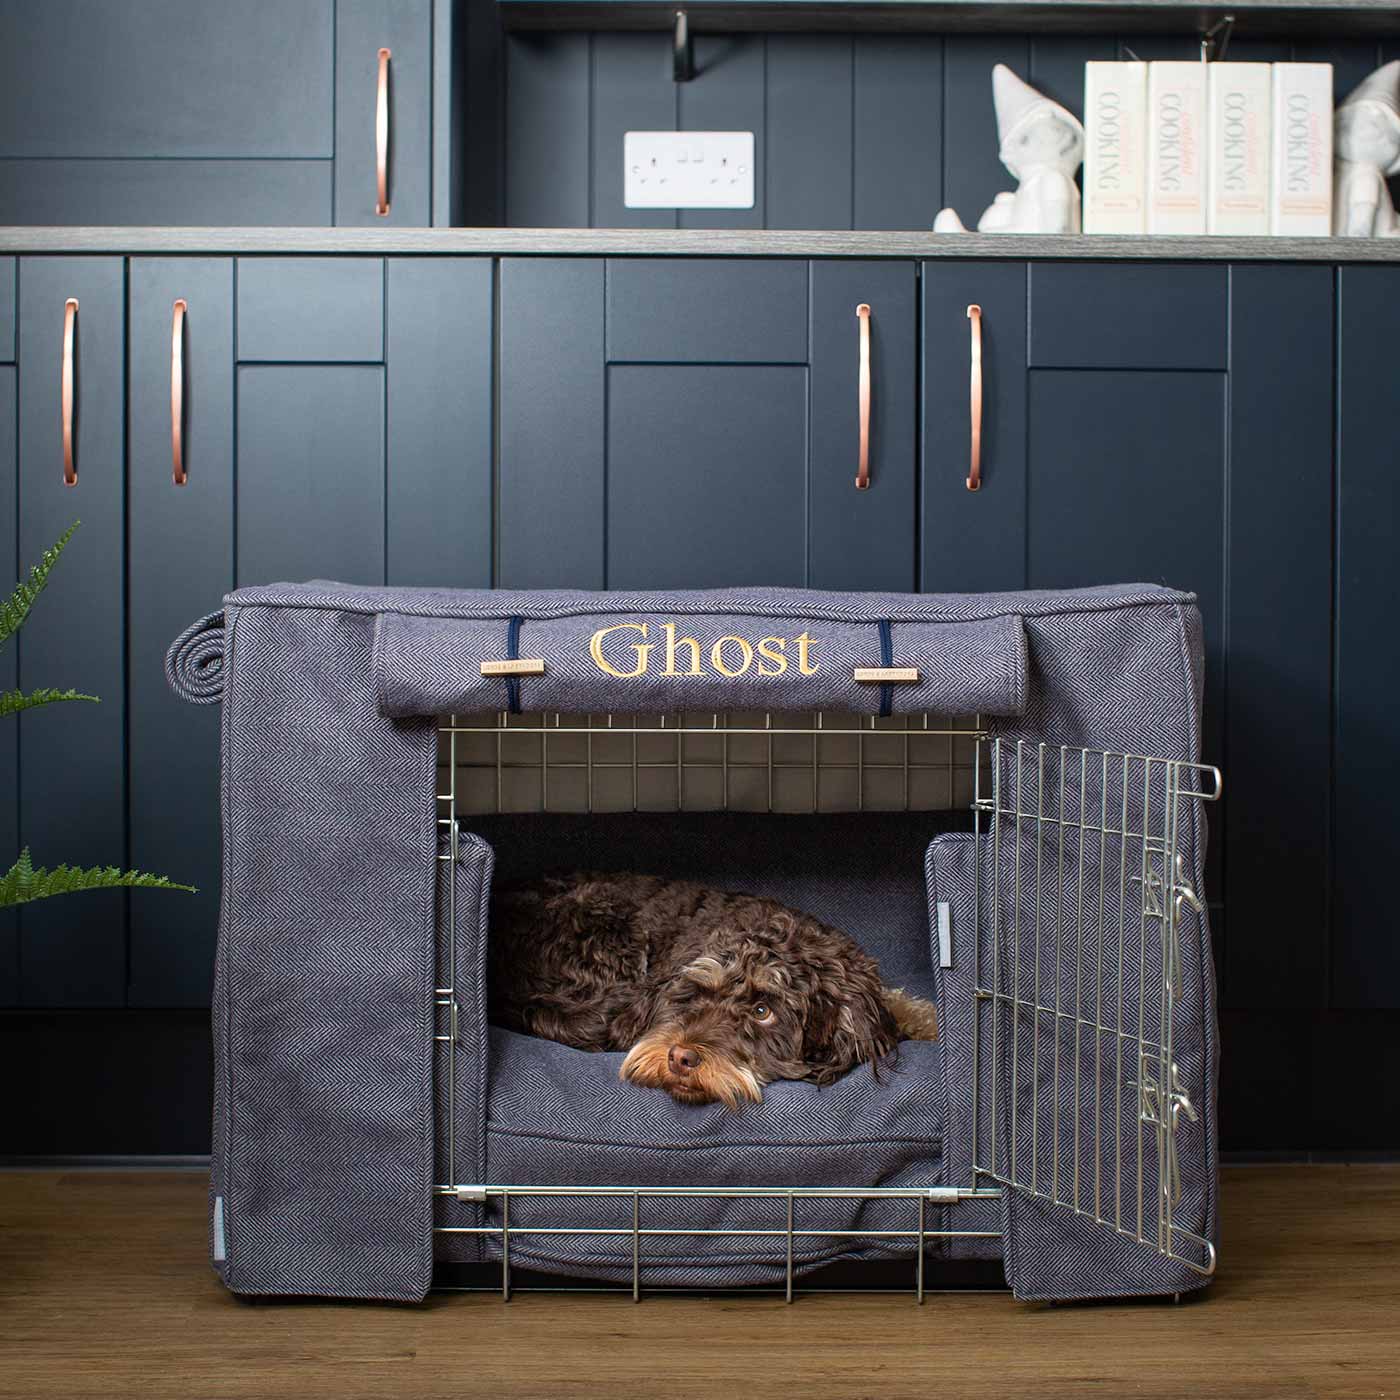 Luxury Heavy Duty Dog Crate, In Stunning Oxford Herringbone Tweed Crate Set, The Perfect Dog Crate Set For Building The Ultimate Pet Den! Dog Crate Cover Available To Personalise at Lords & Labradors